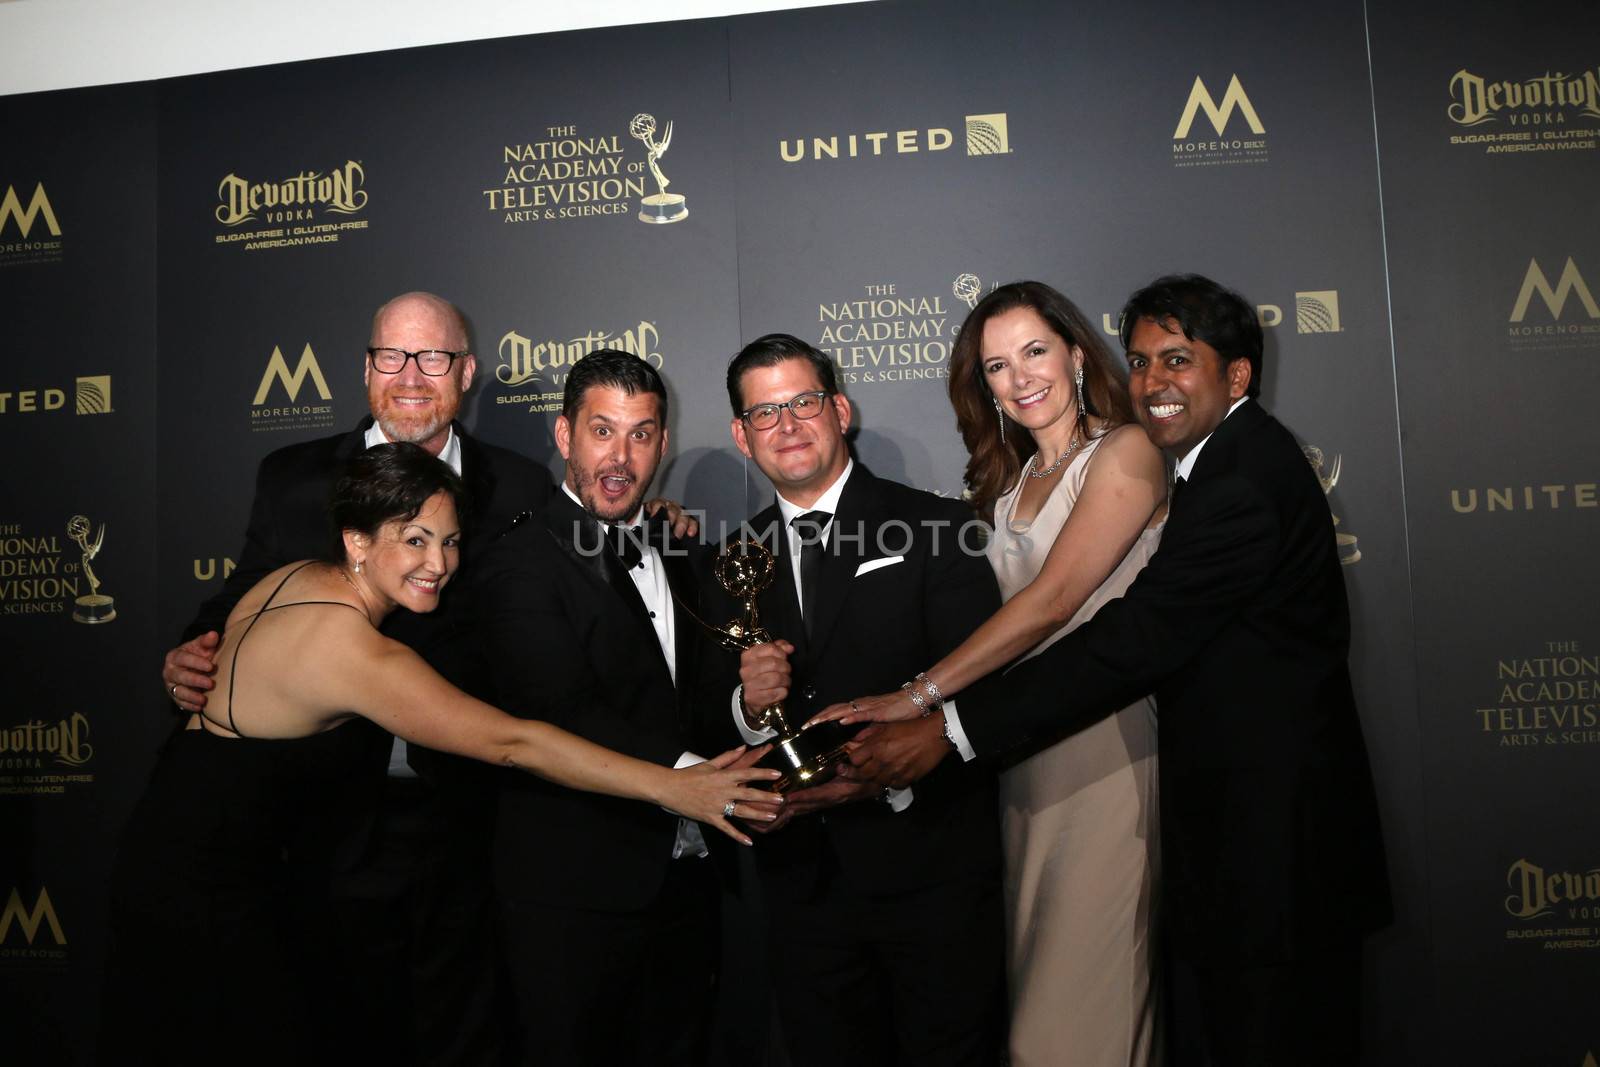 Outstanding Drama Series Writing Team, The Young and The Restless
at the 44th Daytime Emmy Awards - Press Room, Pasadena Civic Auditorium, Pasadena, CA 04-30-17/ImageCollect by ImageCollect